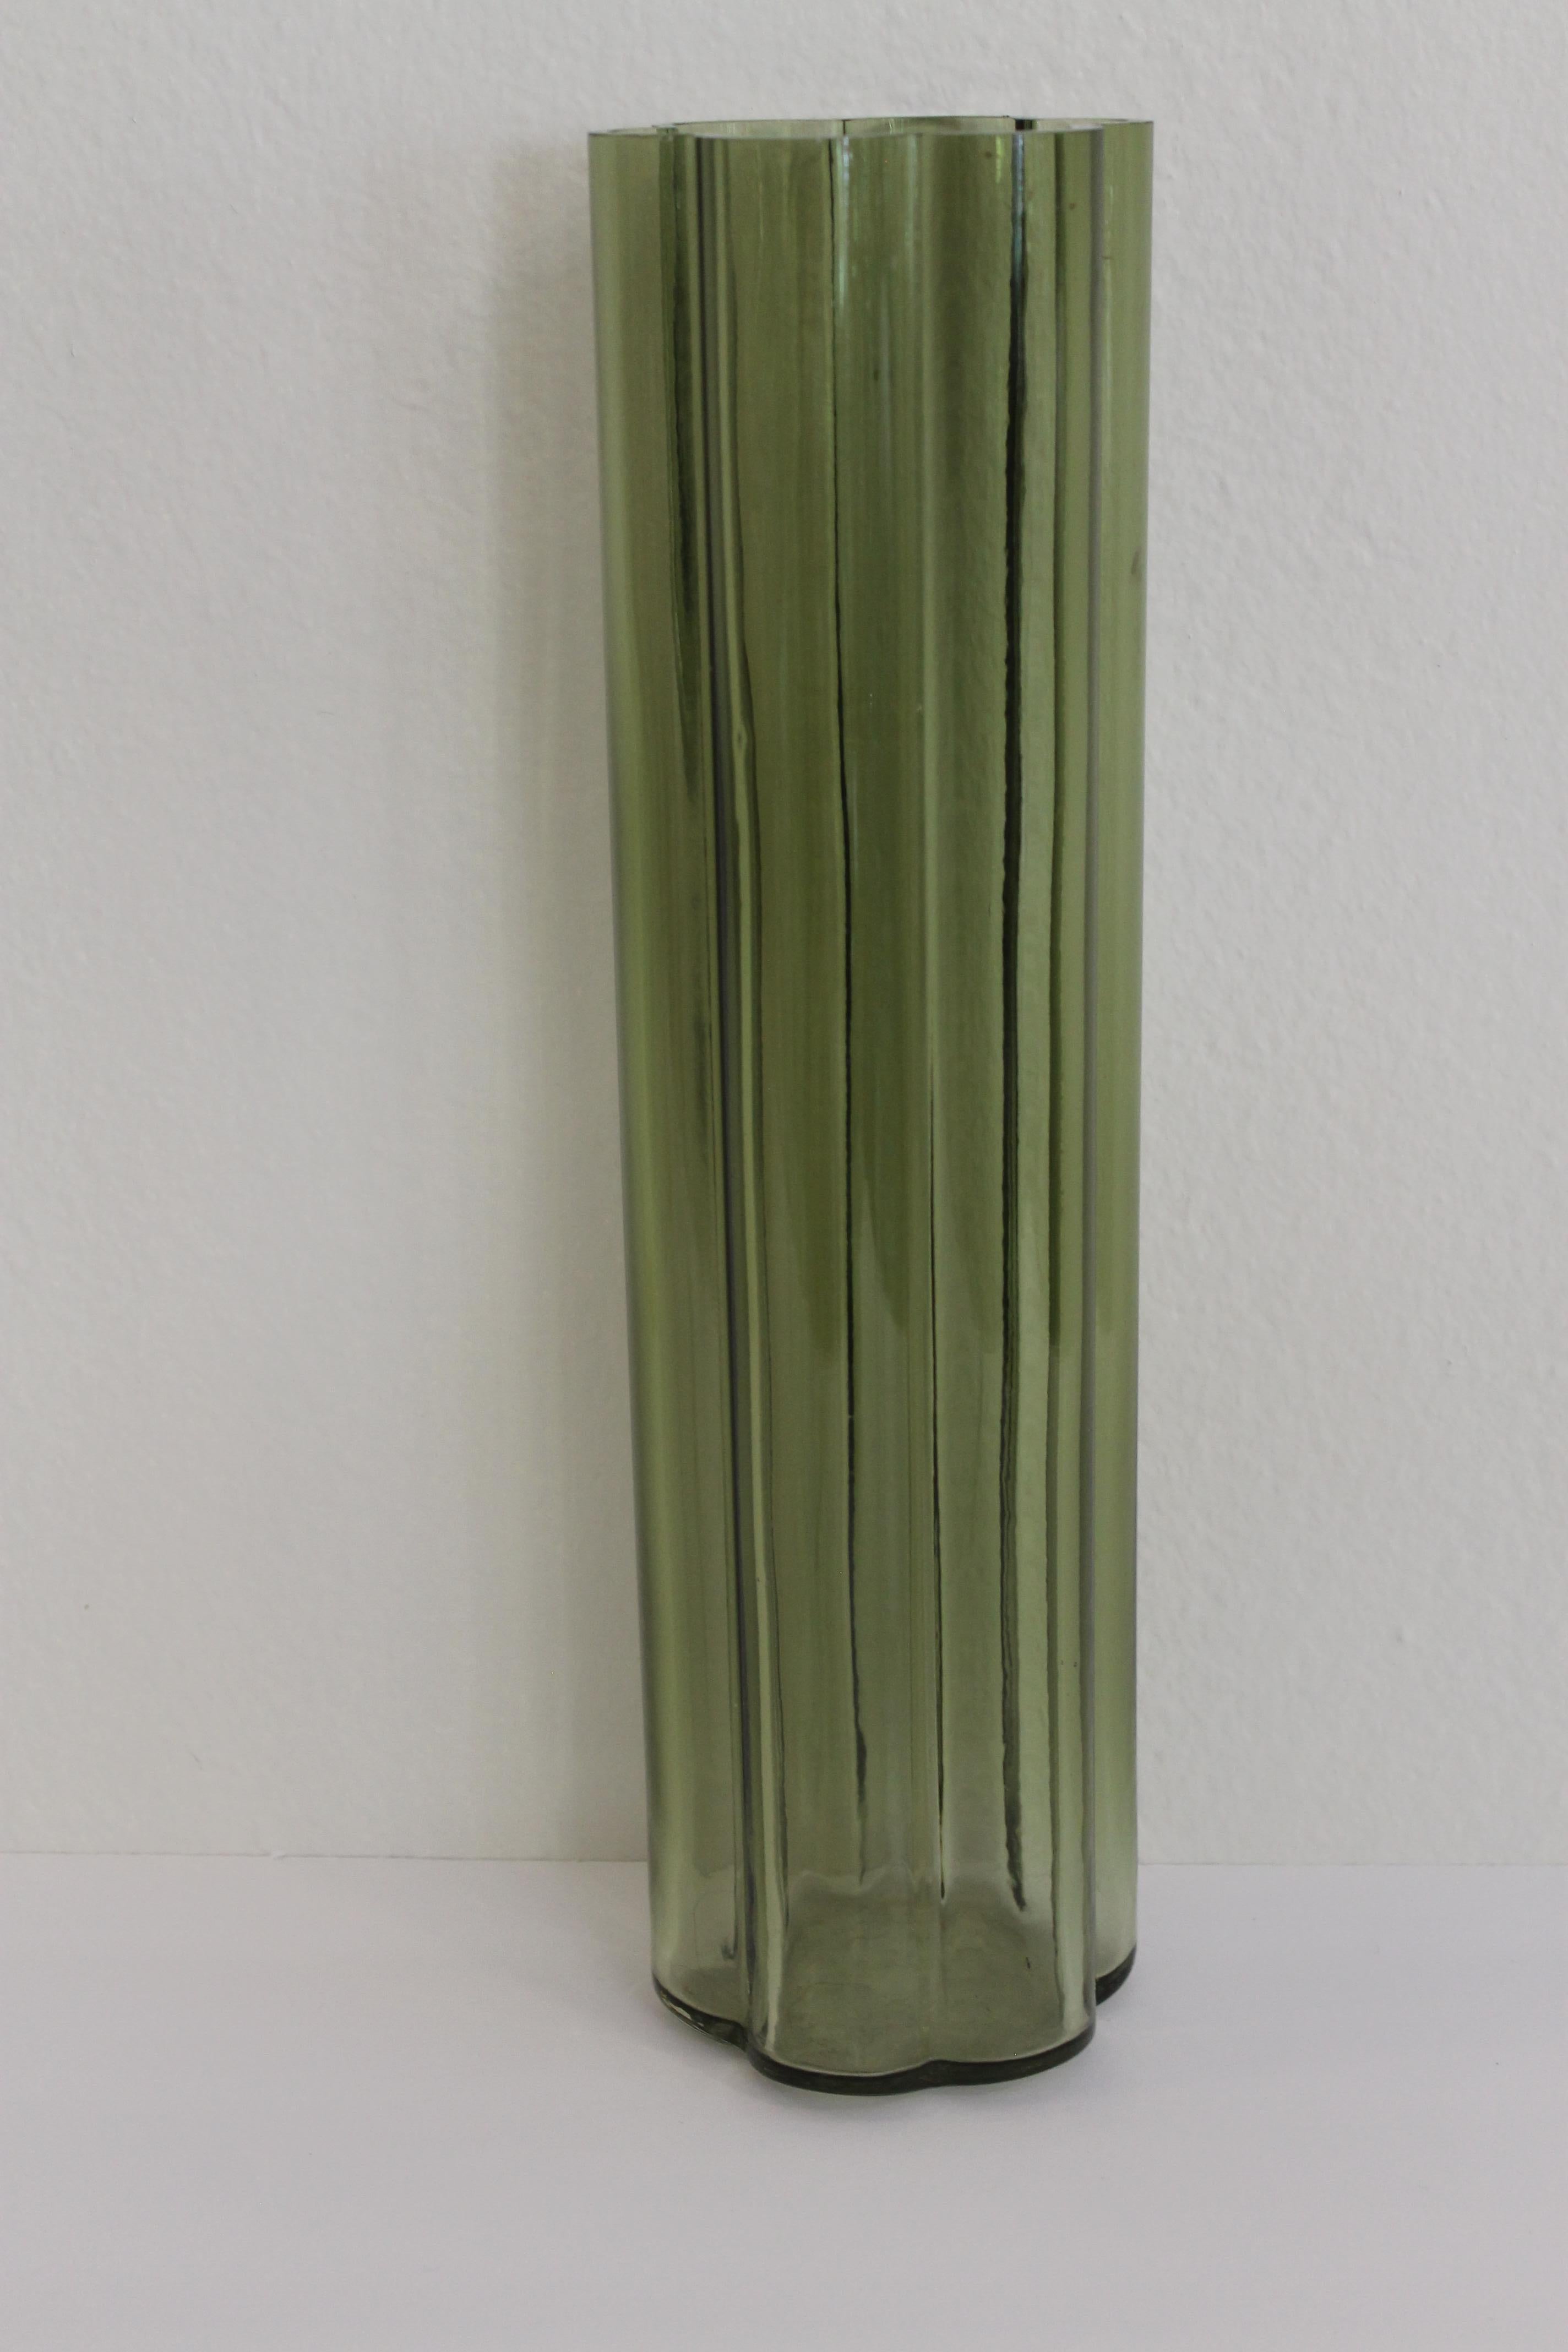 Twenty George Sakier Vases for Fostoria In Good Condition For Sale In Palm Springs, CA